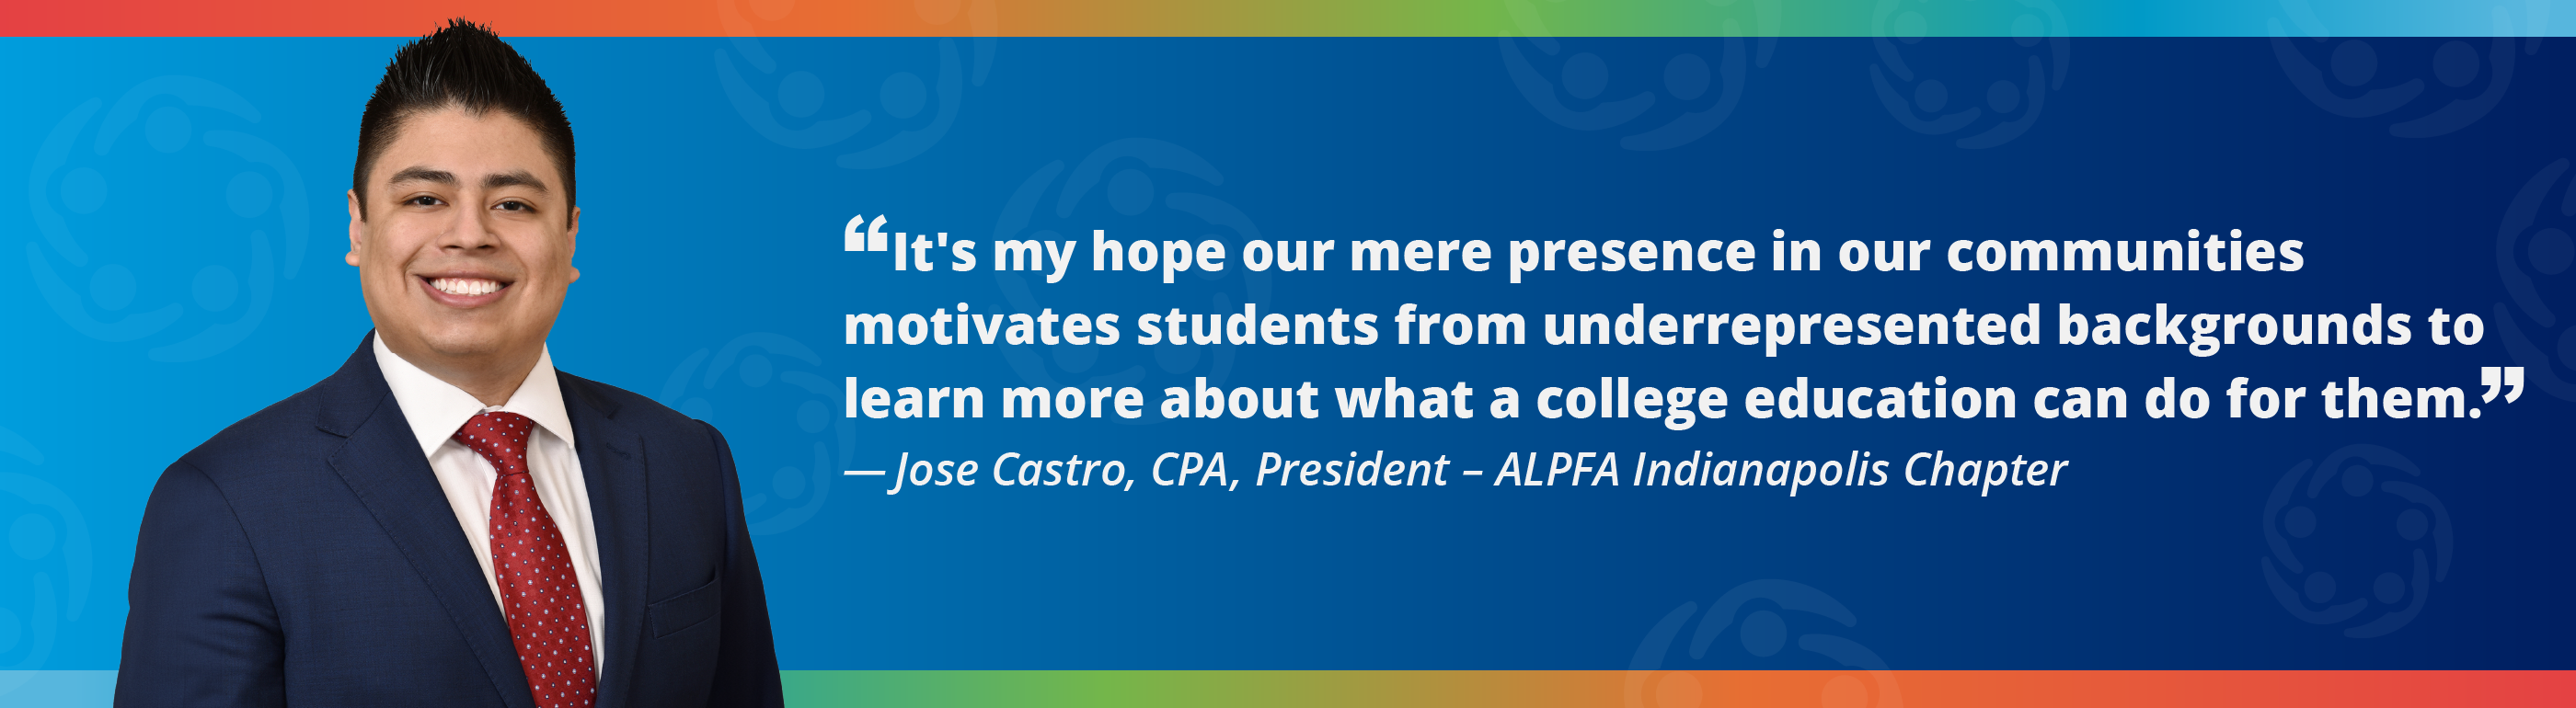 Quote from Jose Castro, CPA, President, ALPFA Indianapolis Chapter